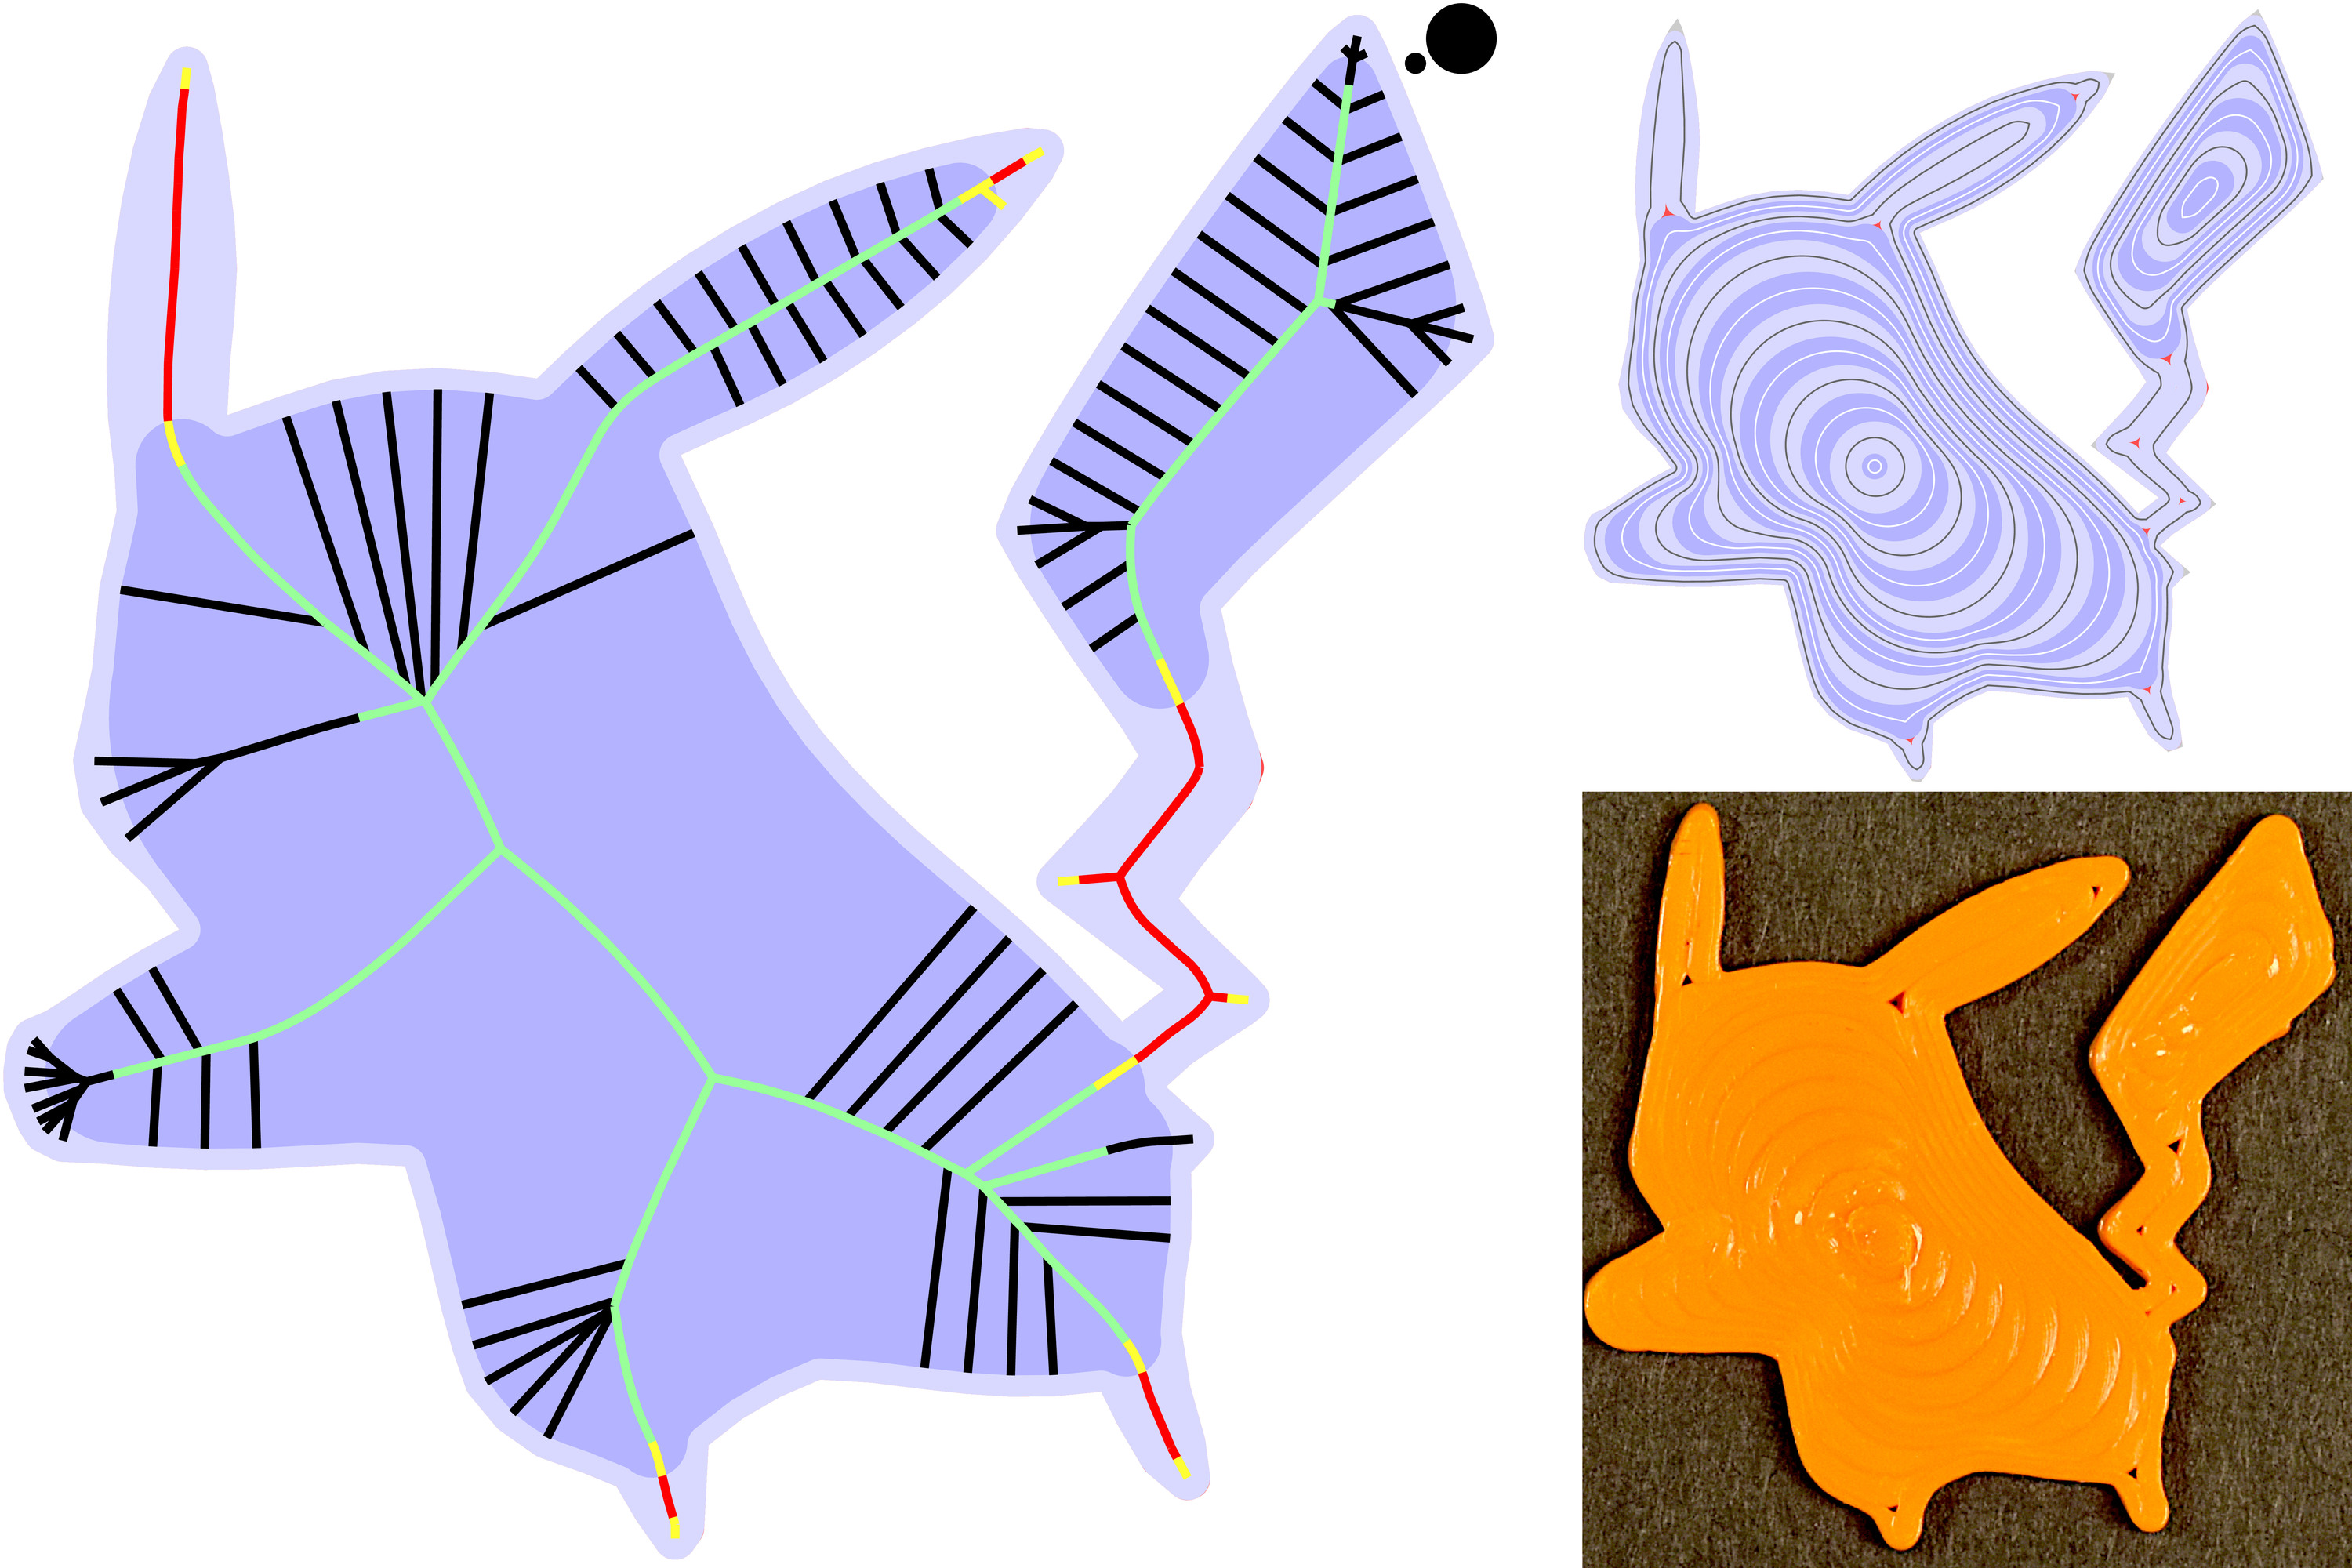 Left. The medial axis of the shape has been subdivided into variously labeled (colored) pieces that guide the modeling of the first ribbon (lighter blue).
Top-right. The computed ribbons fill the shape. The innermost ones are annuli.
Bottom-right. The printed slice.